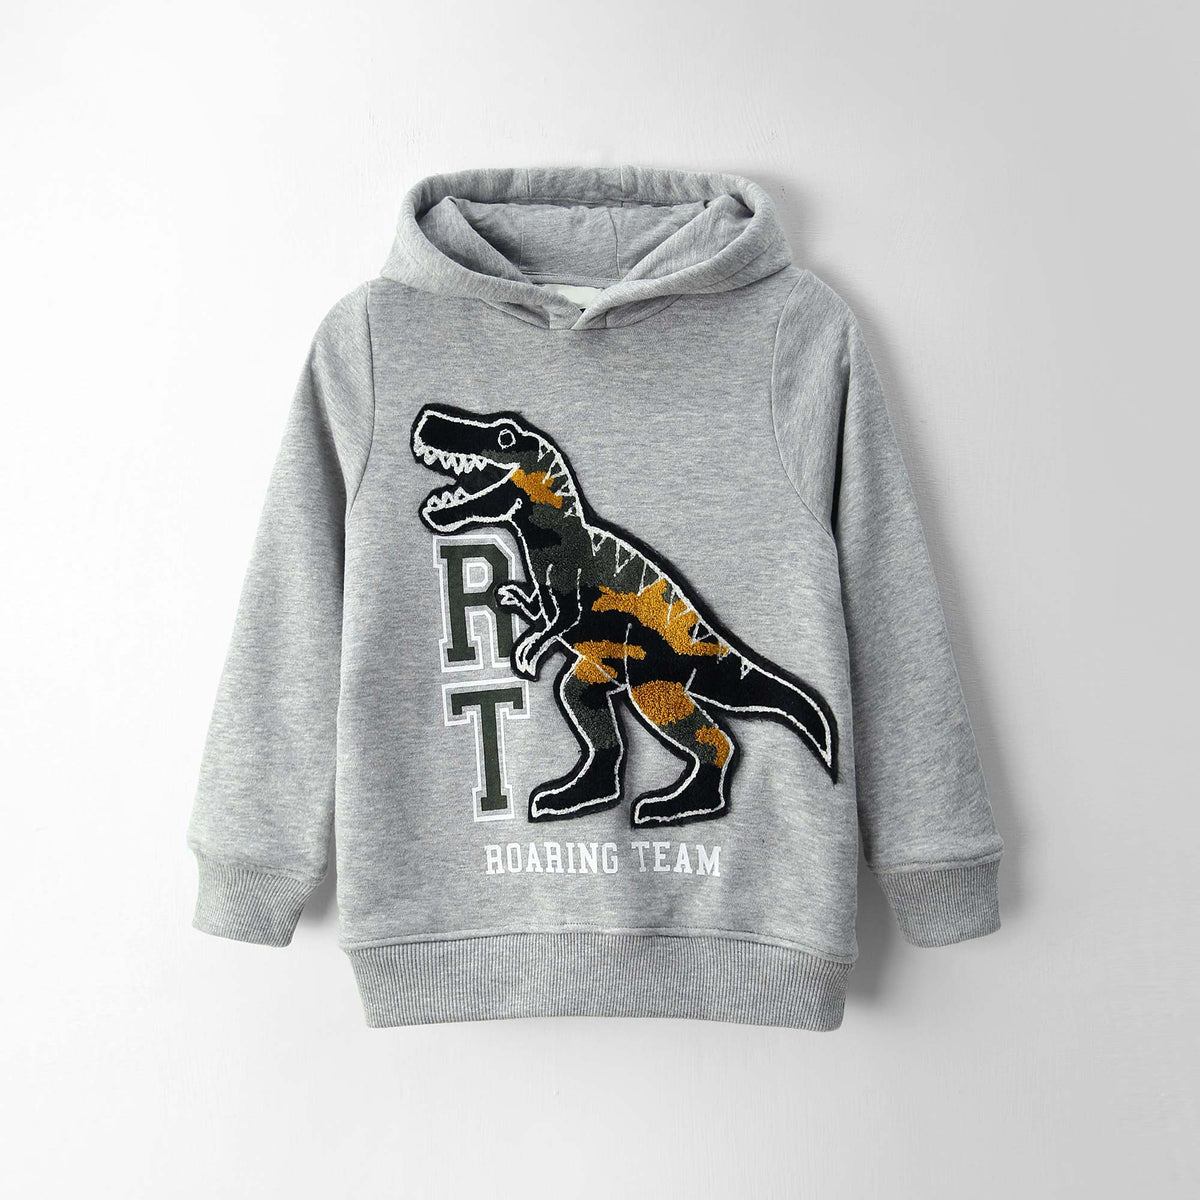 Premium Quality Embroidered Gray Fleece Hoodie For Boys